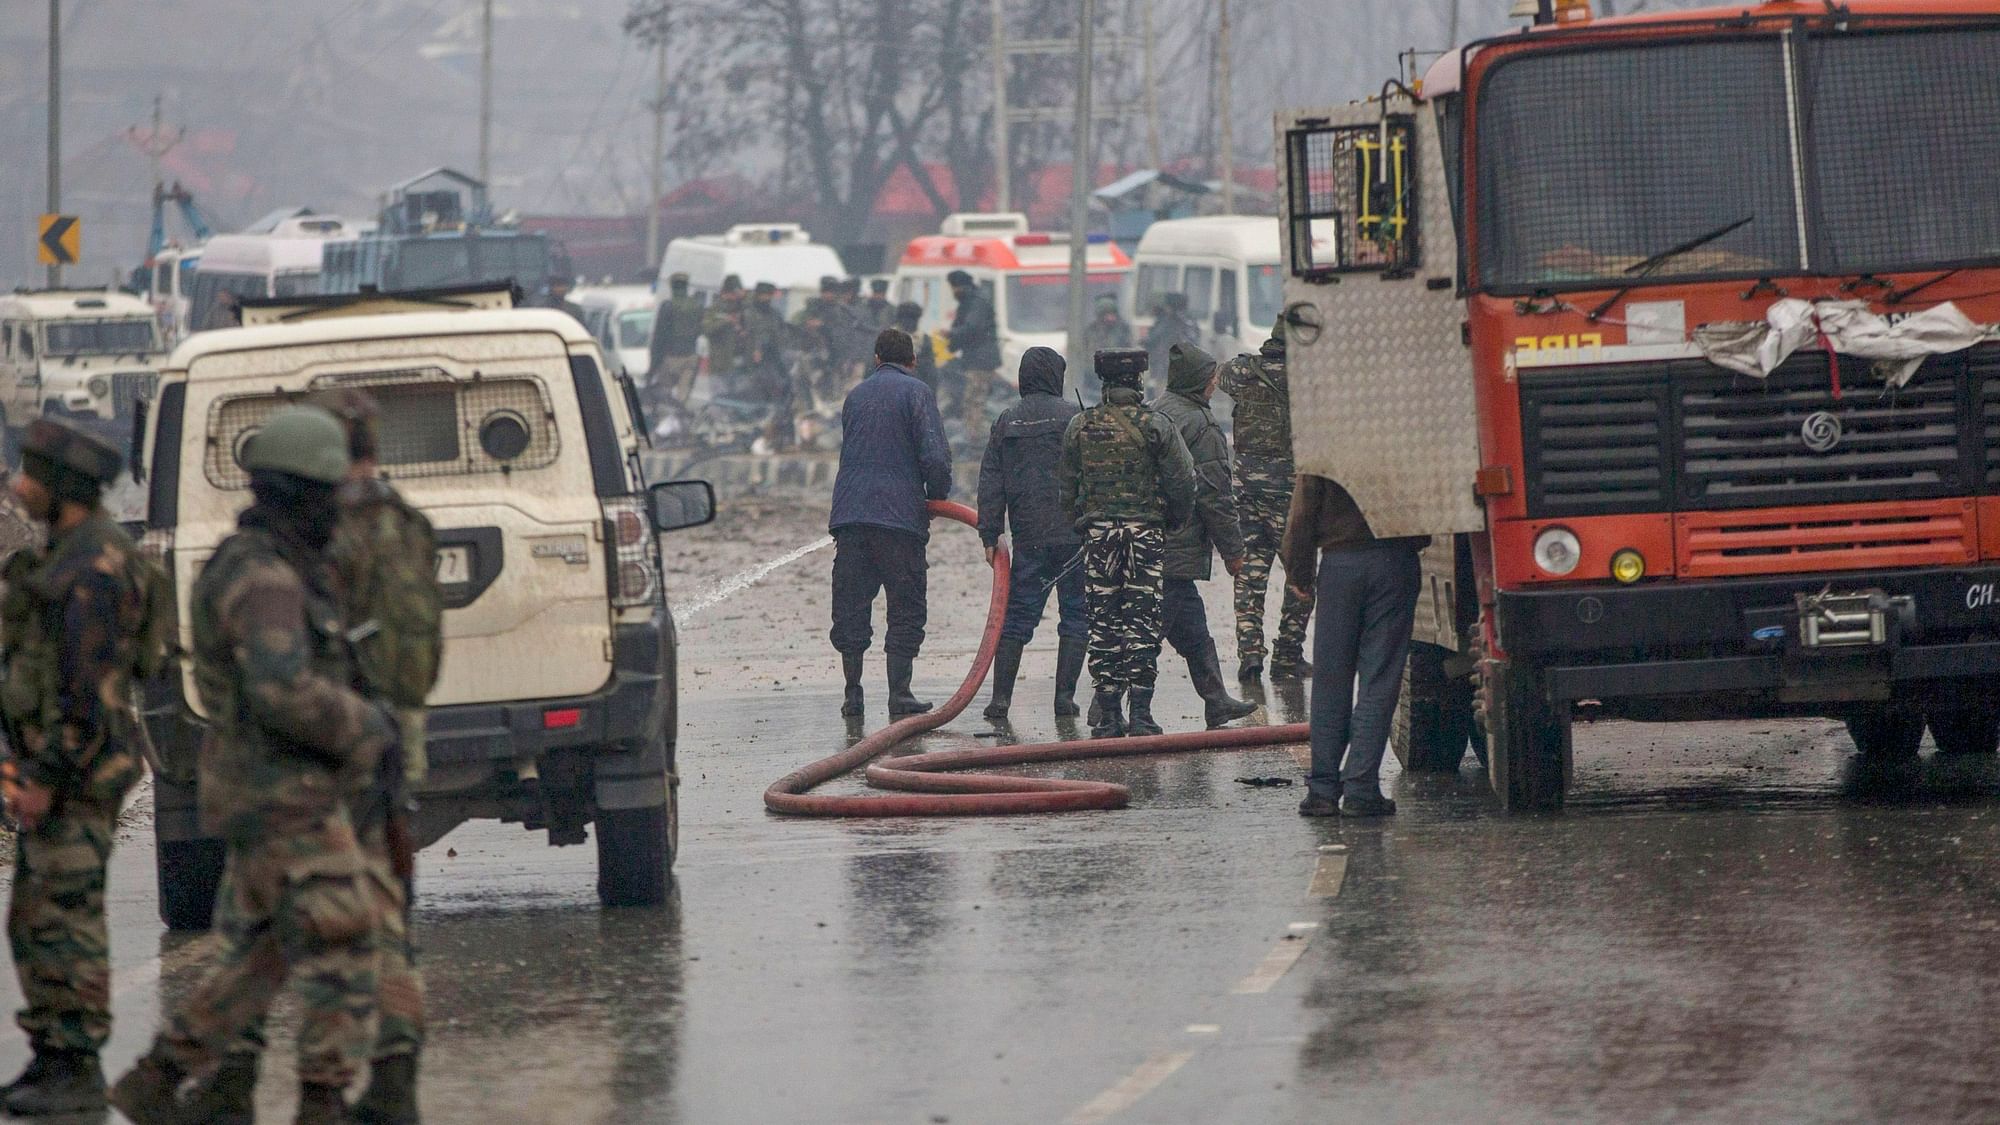 The death toll in the Pulwama attack on a CRPF convoy has risen to 40.